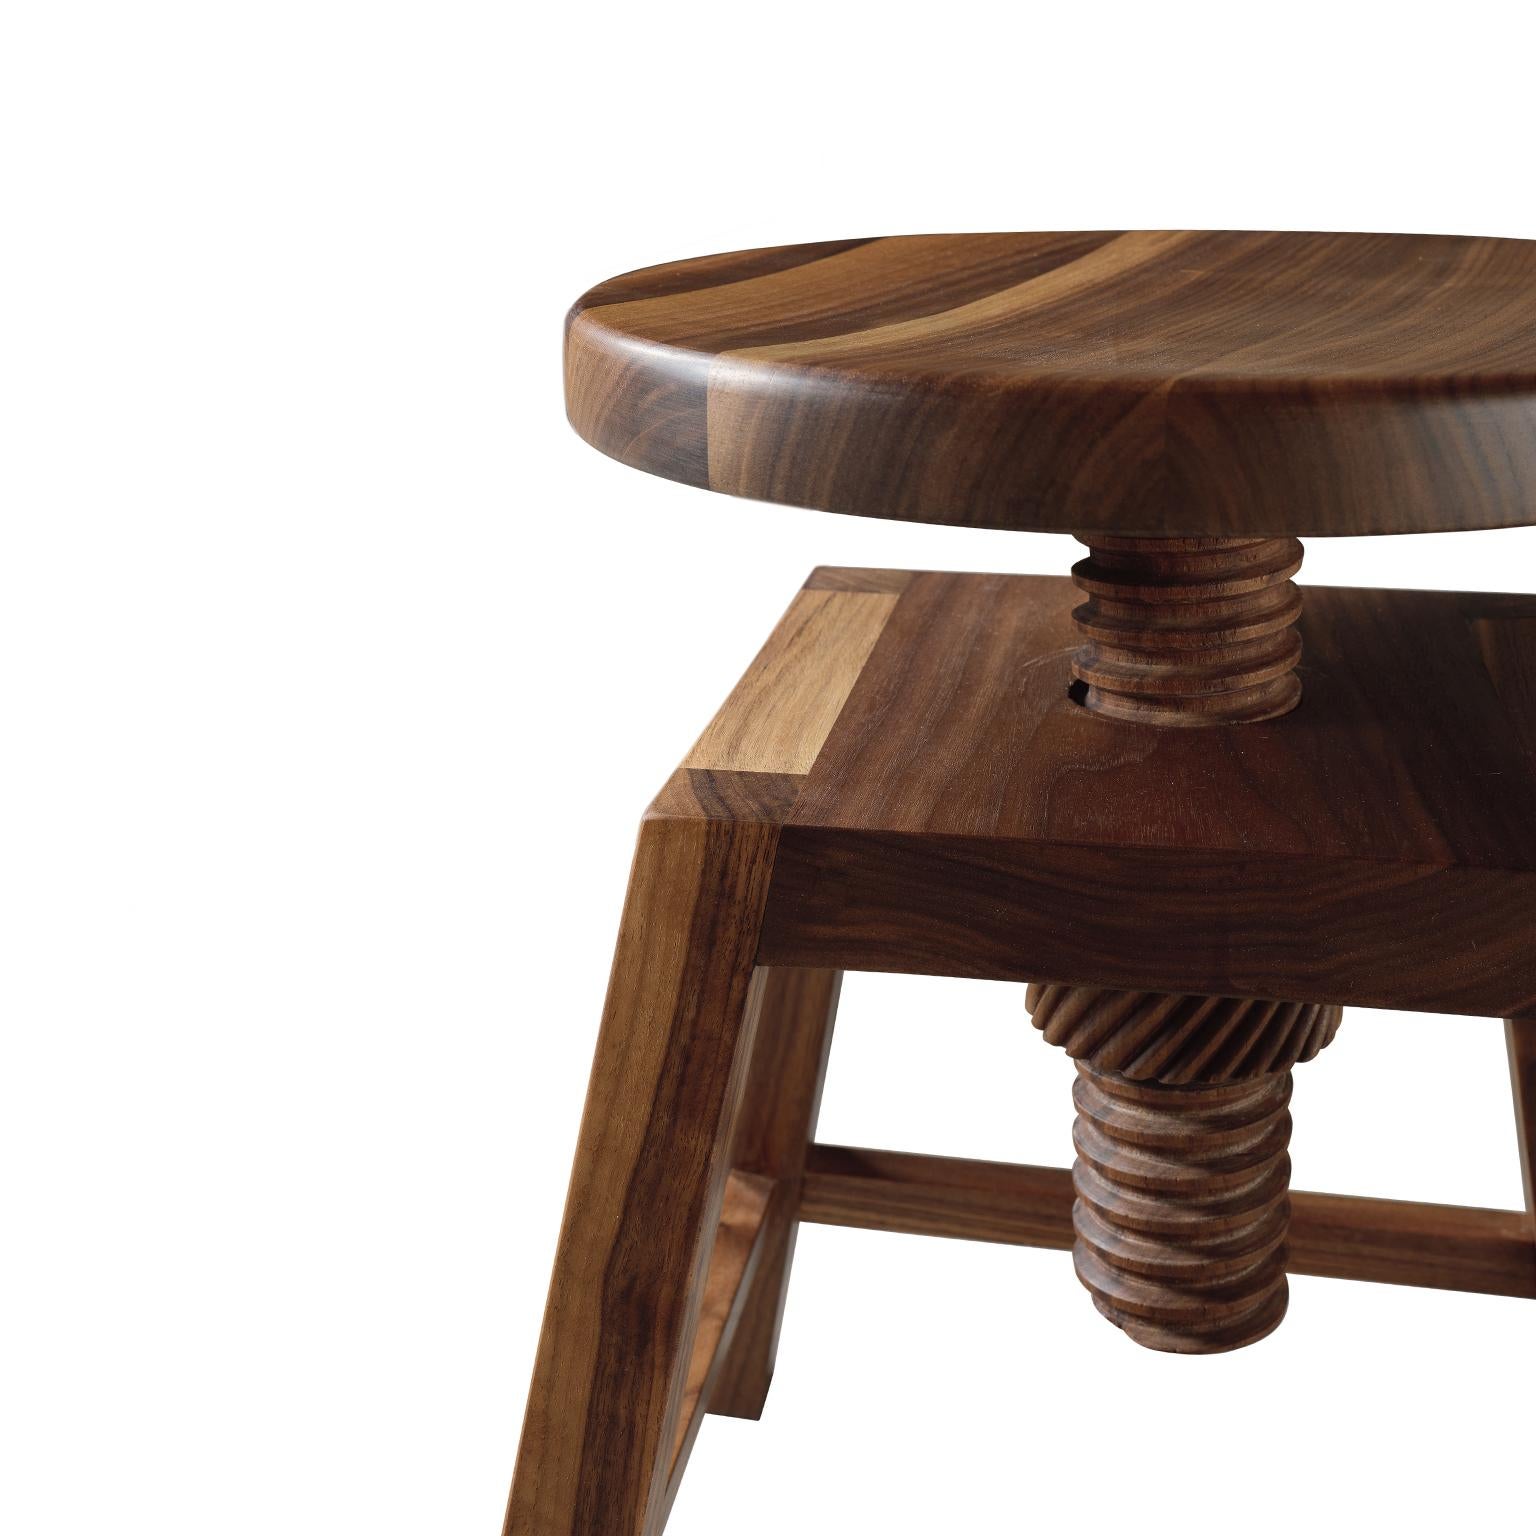 A refined and simple design, where the premium solid walnut in oil finish is used in its maximum expression. The central screw, entirely in wood, is the result of the work of expert Italian craftsmen. A timeless stool with natural and authentic